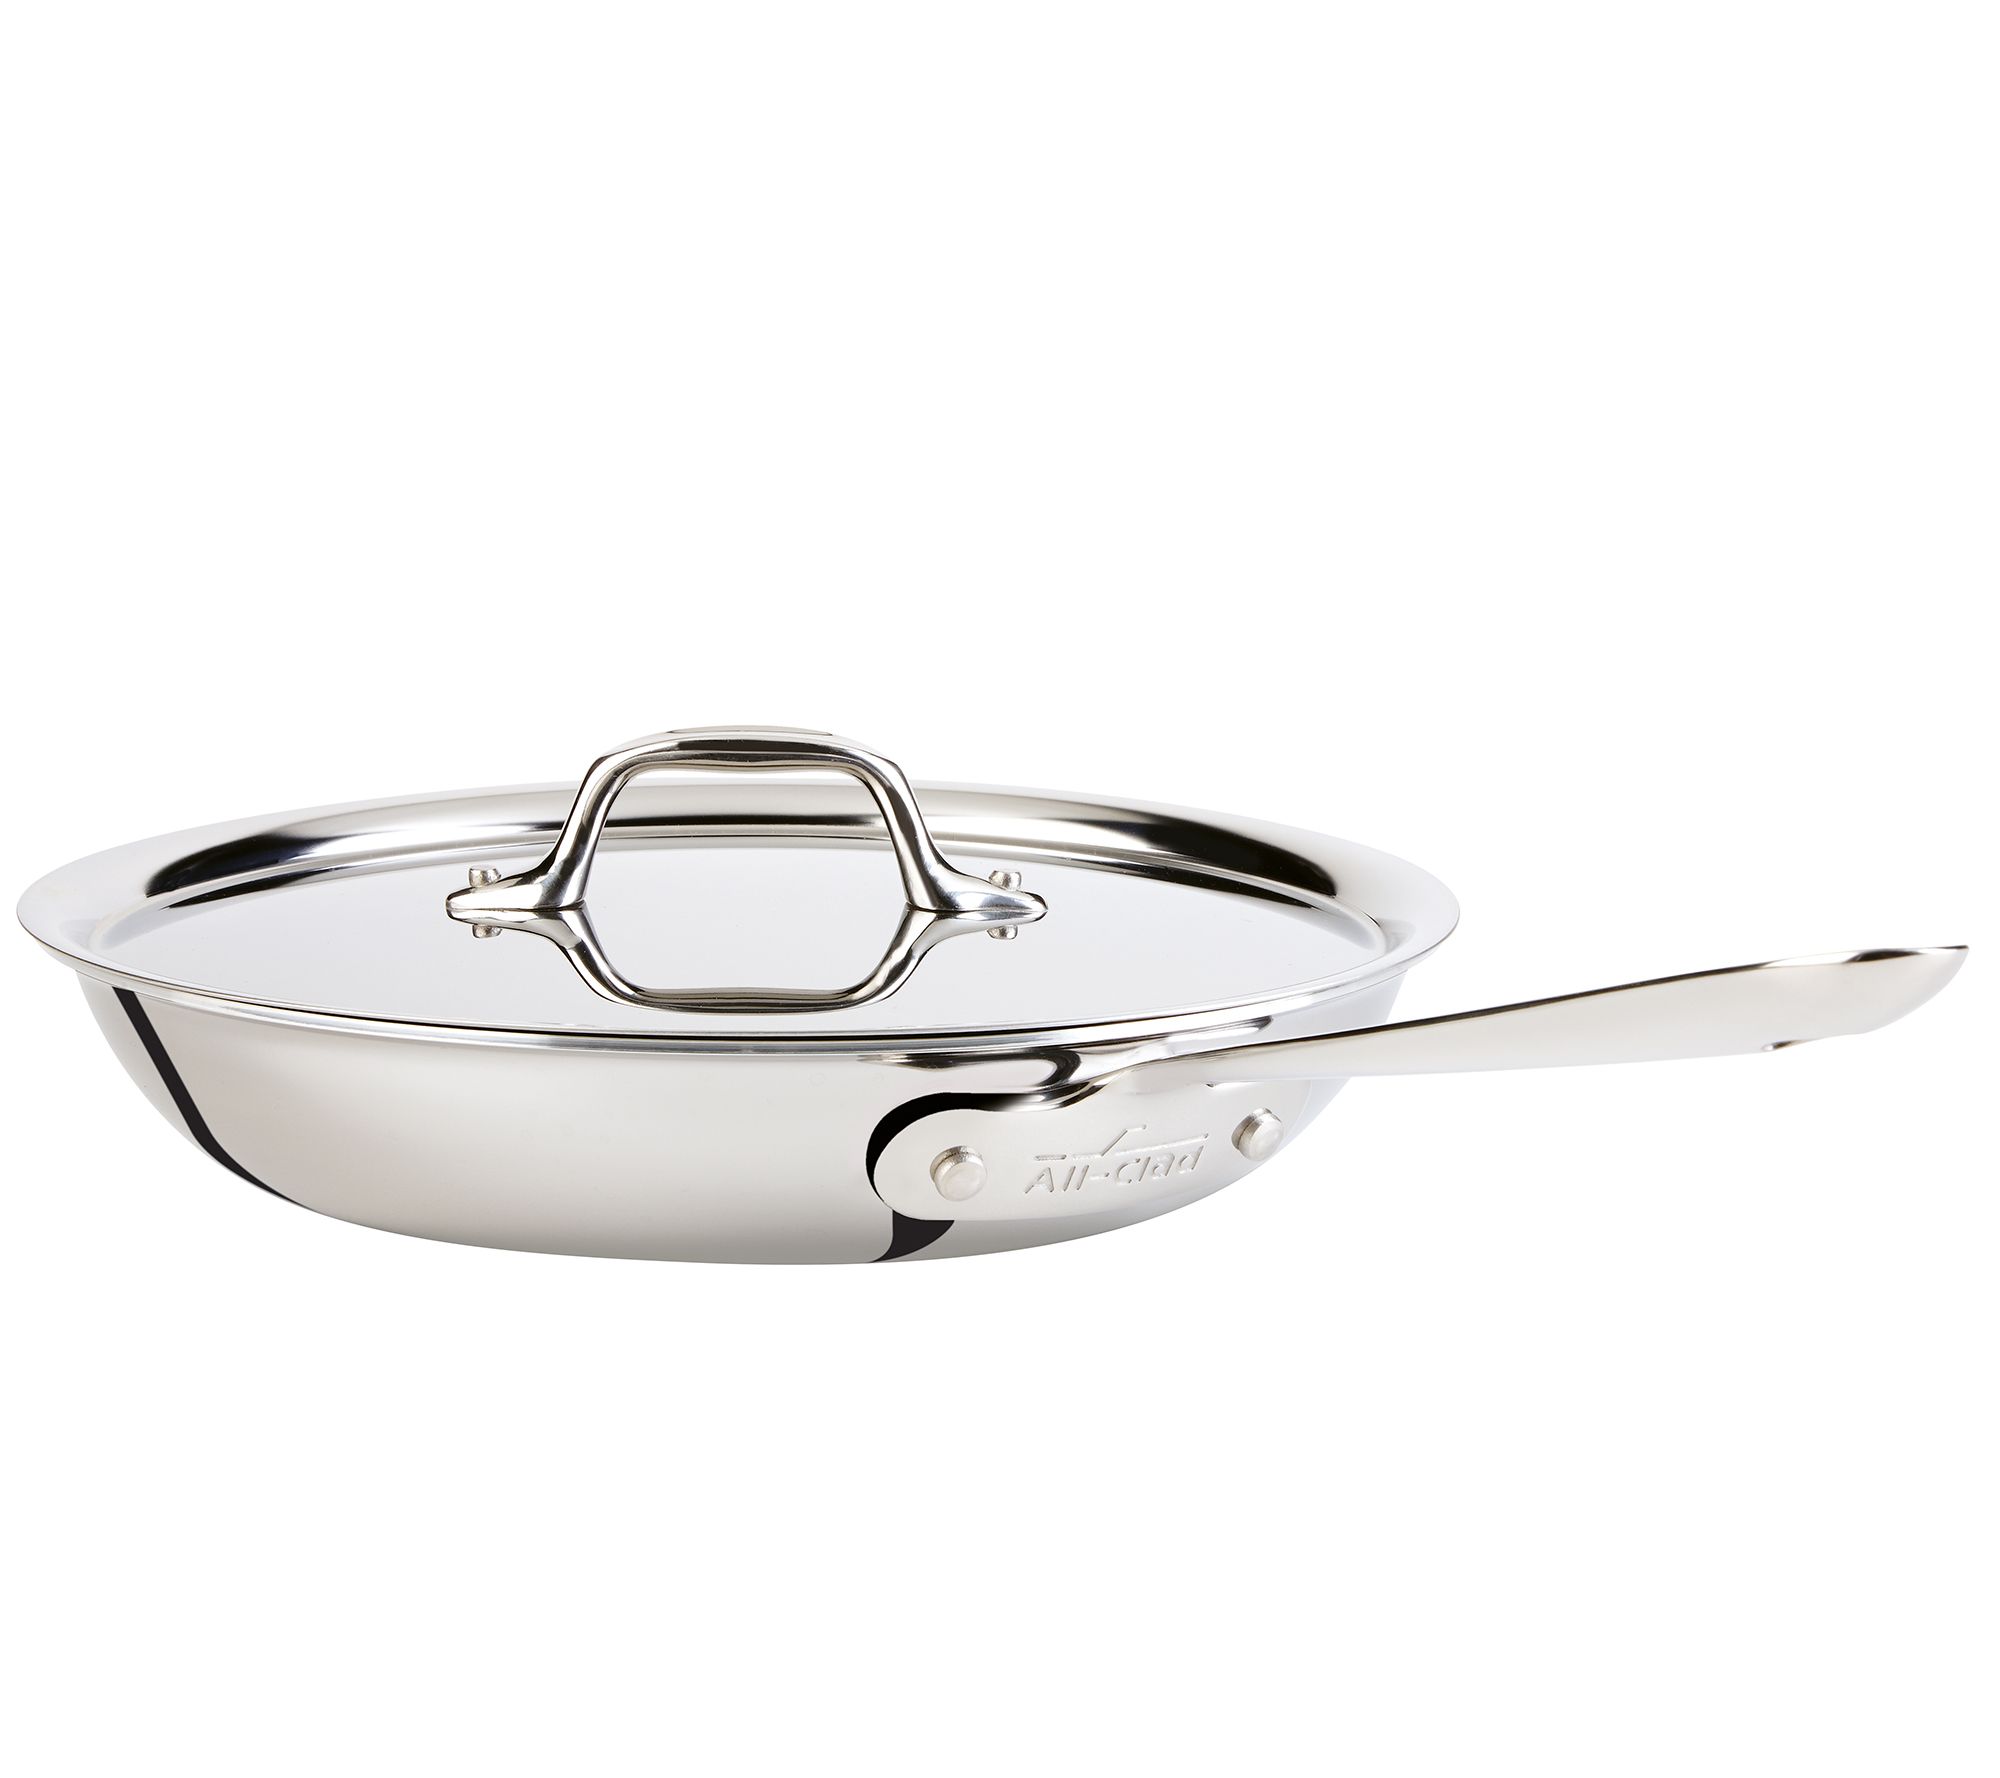 All-Clad Stainless Steel 10" Covered Fry Pan - QVC.com All Clad Stainless Steel Outdoor Fry Pan